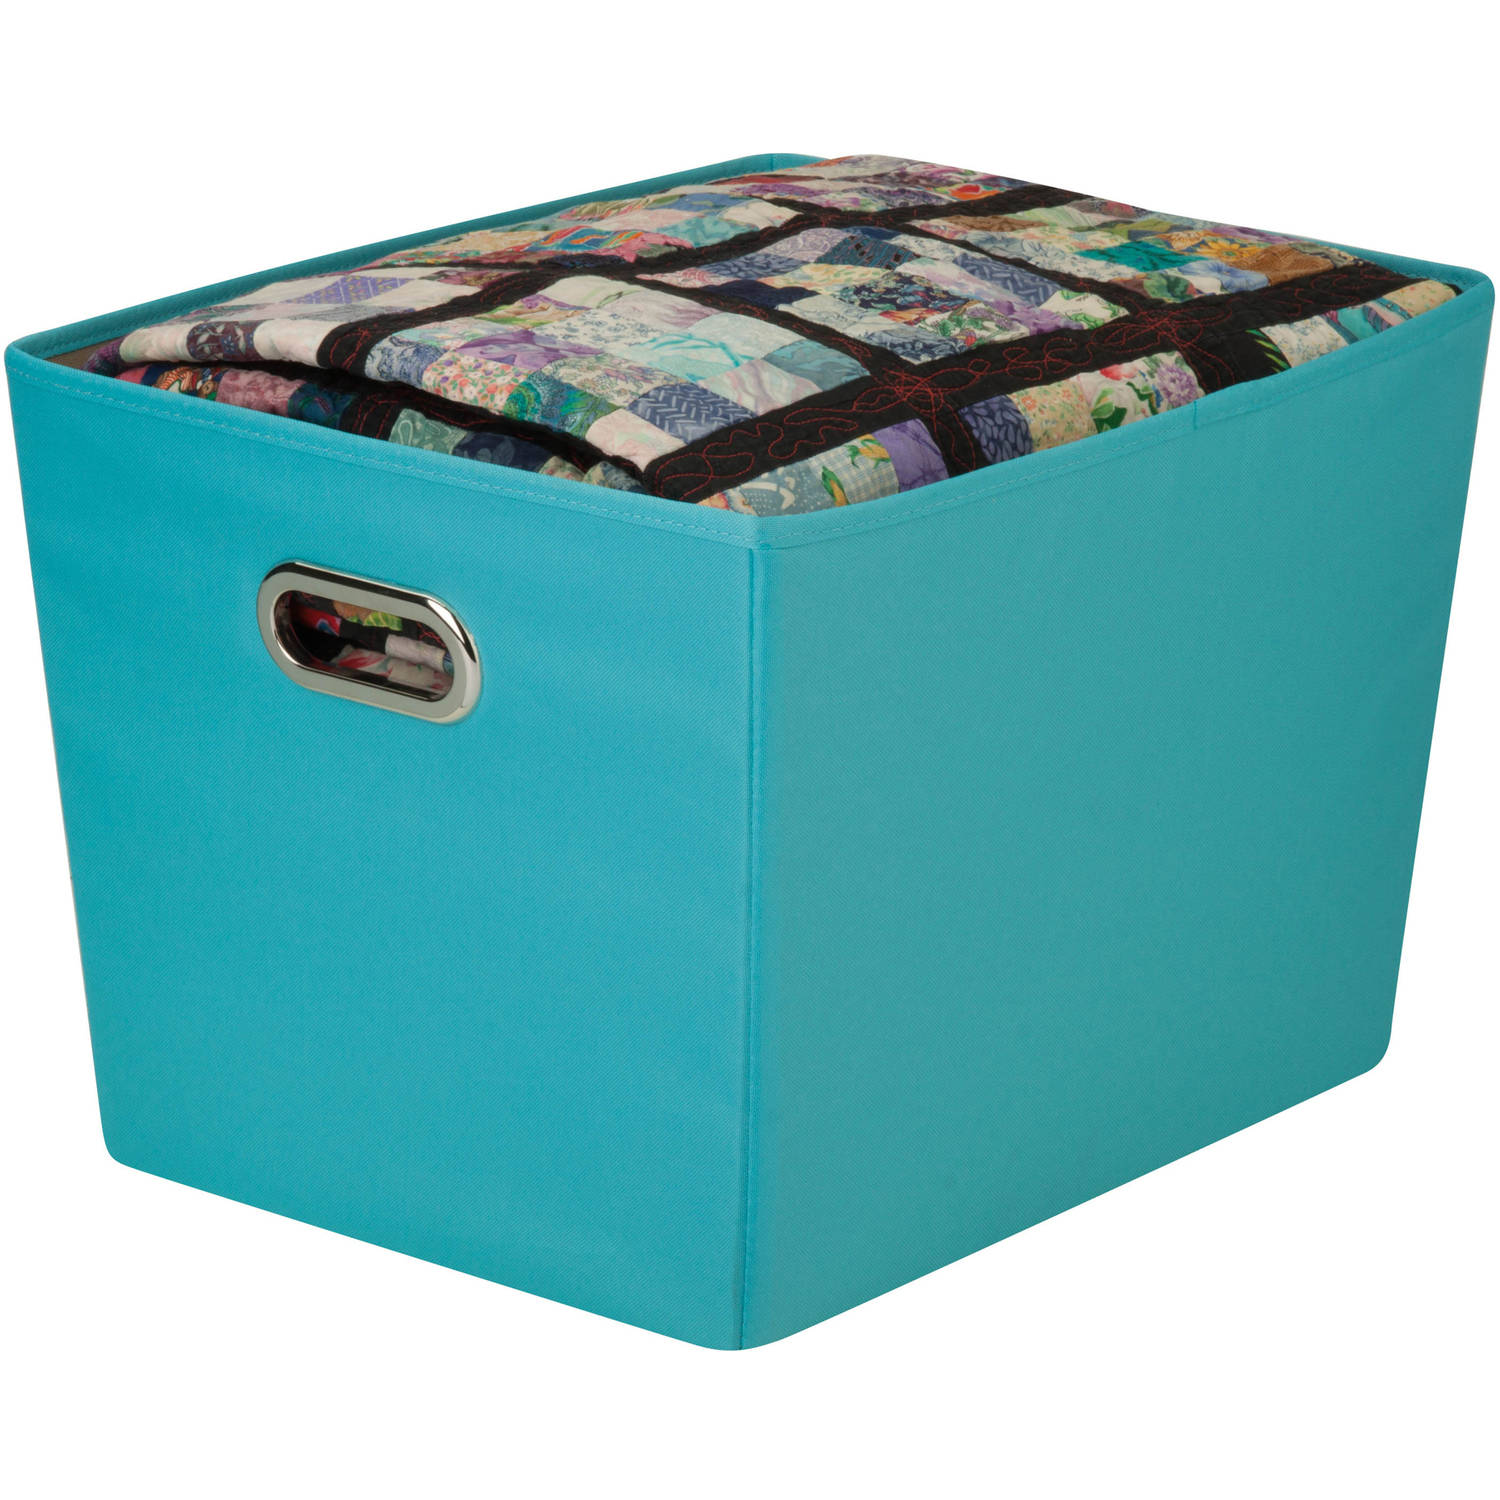 Honey Can Do Large Decorative Storage Bin with Handles, Multicolor - image 2 of 4